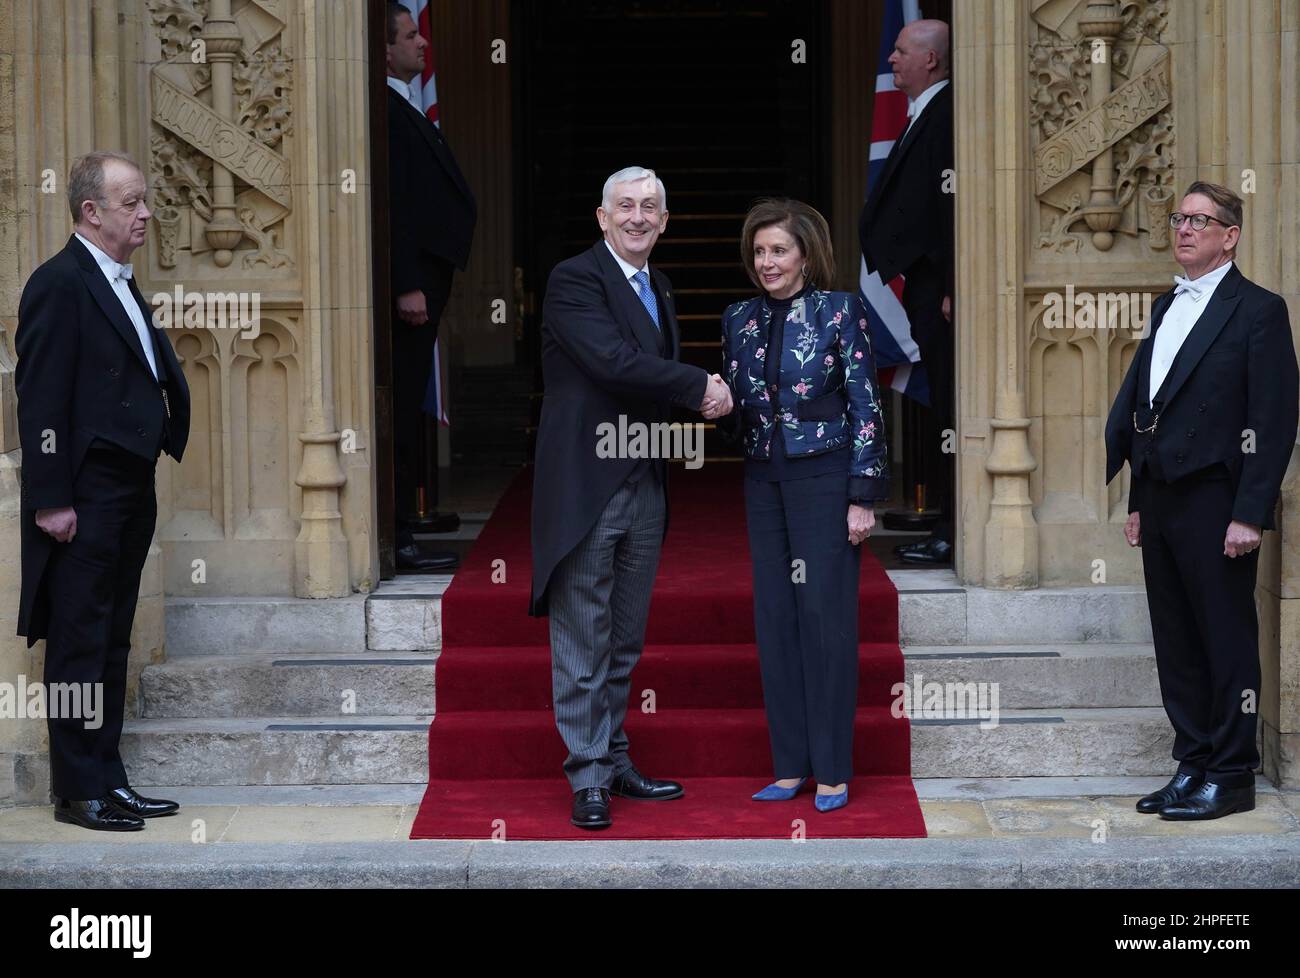 Nancy Pelosi, Speaker of the House of Representatives, with Commons Speaker Sir Lindsay Hoyle, during a visit as his guest to the Houses of Parliament in Westminster, London. Picture date: Monday February 21, 2022. Stock Photo